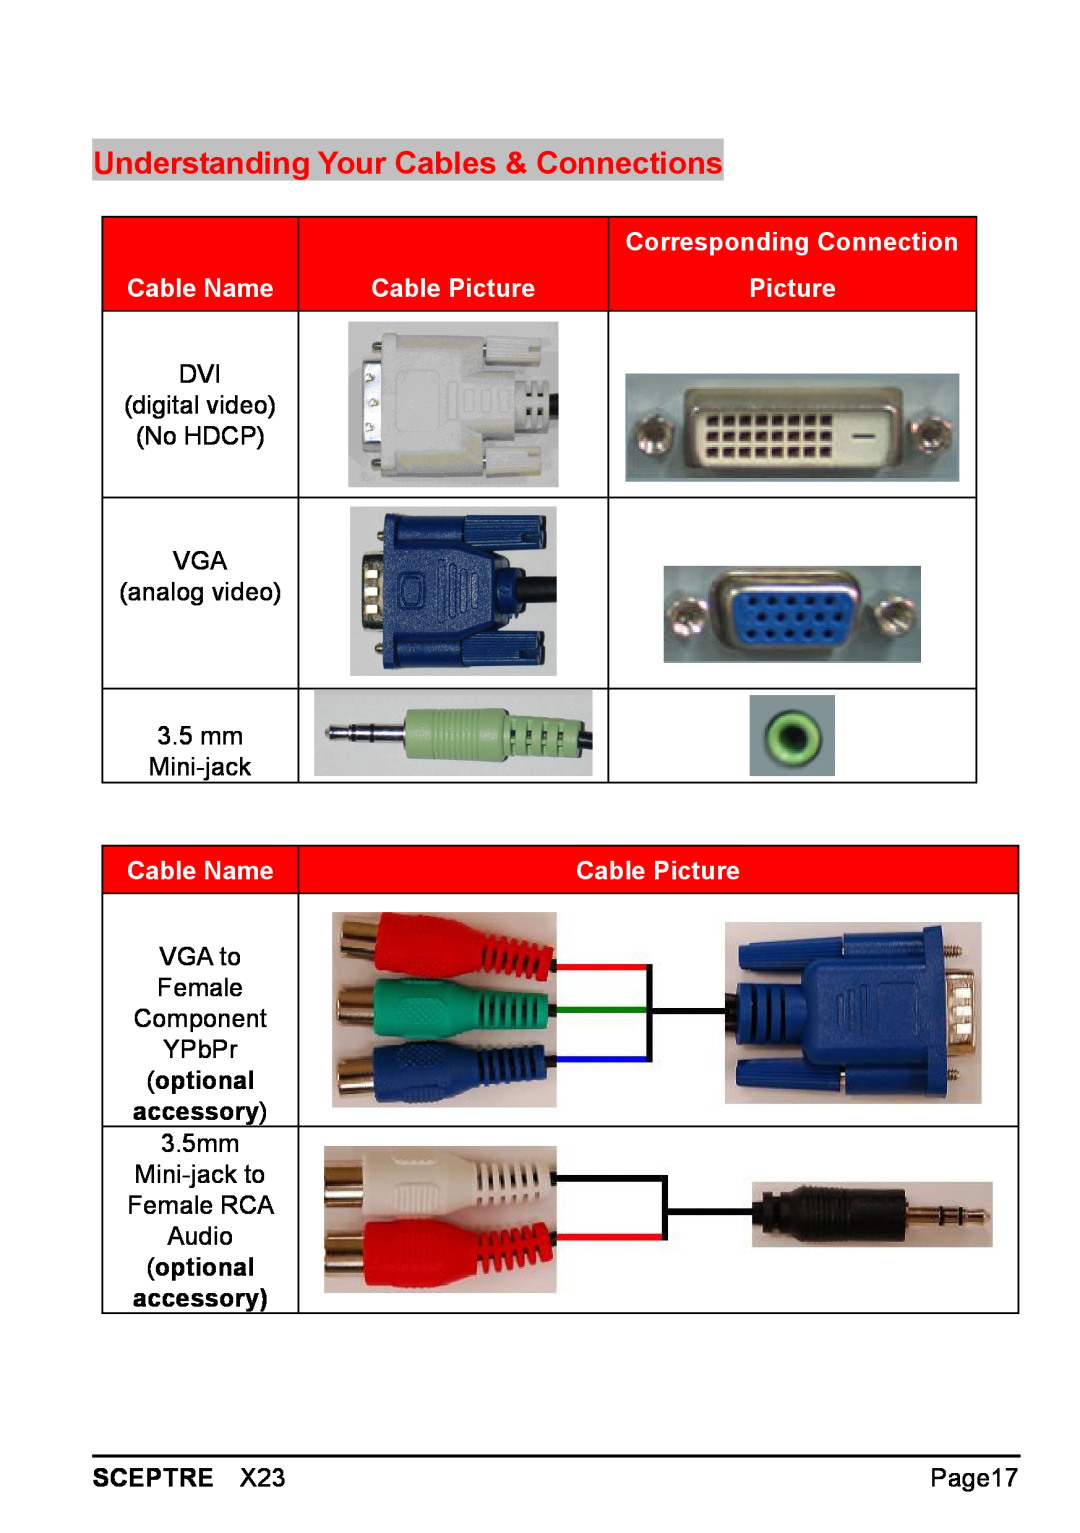 Sceptre Technologies X23 Understanding Your Cables & Connections, Corresponding Connection, Cable Name, Cable Picture 